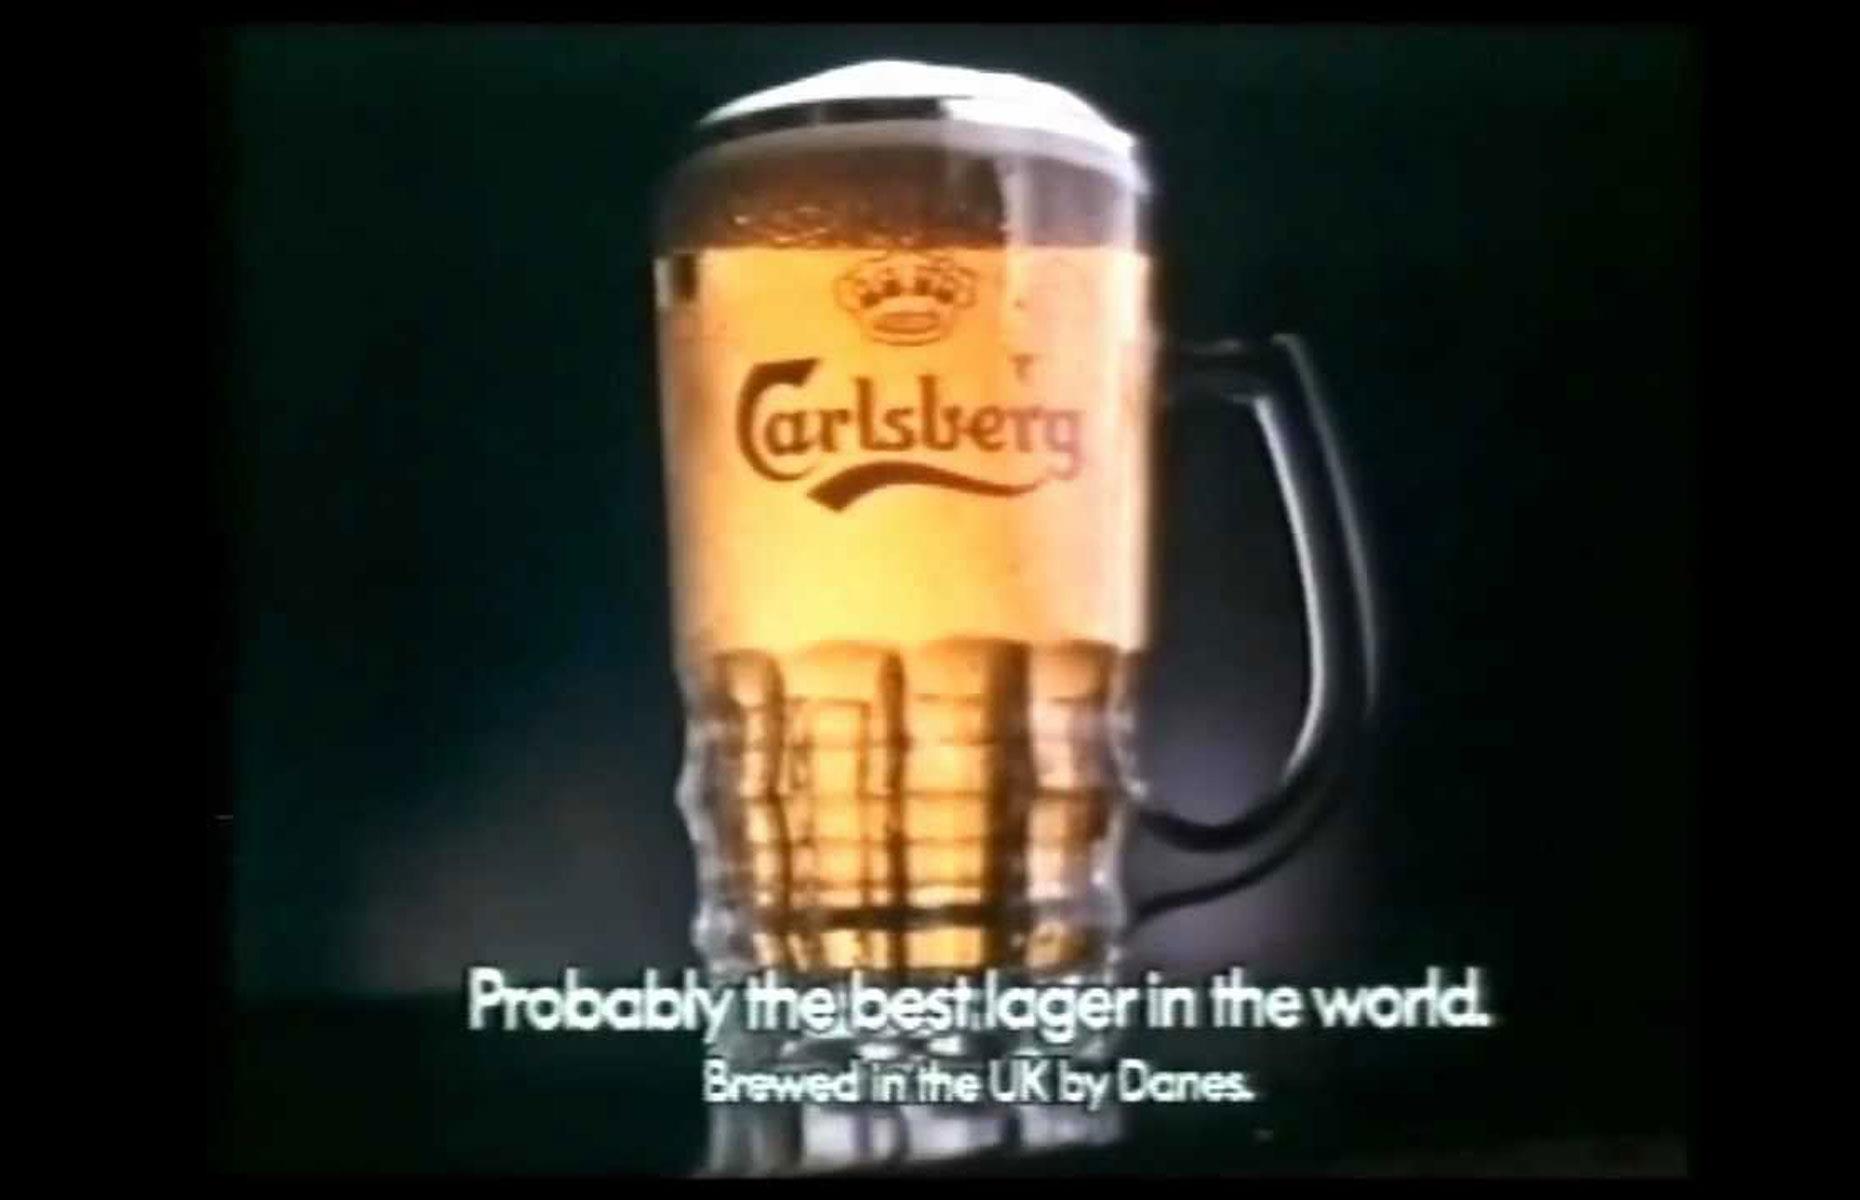 Probably the best lager in the world – Carlsberg